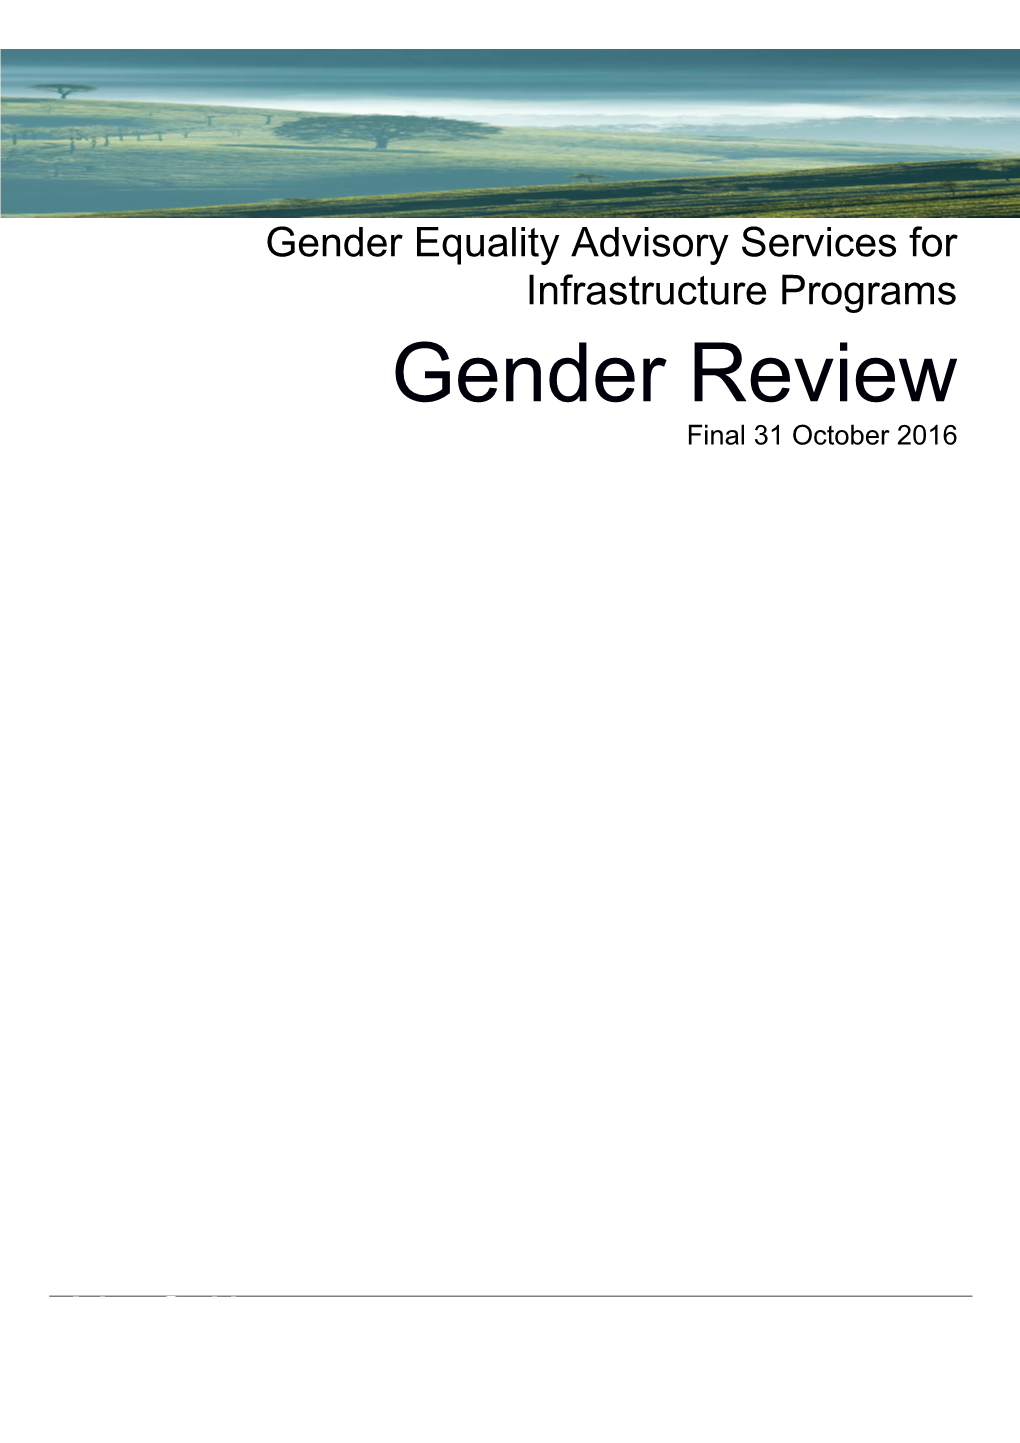 Gender Equality Advisory Services for Infrastructure Programs Gender Review